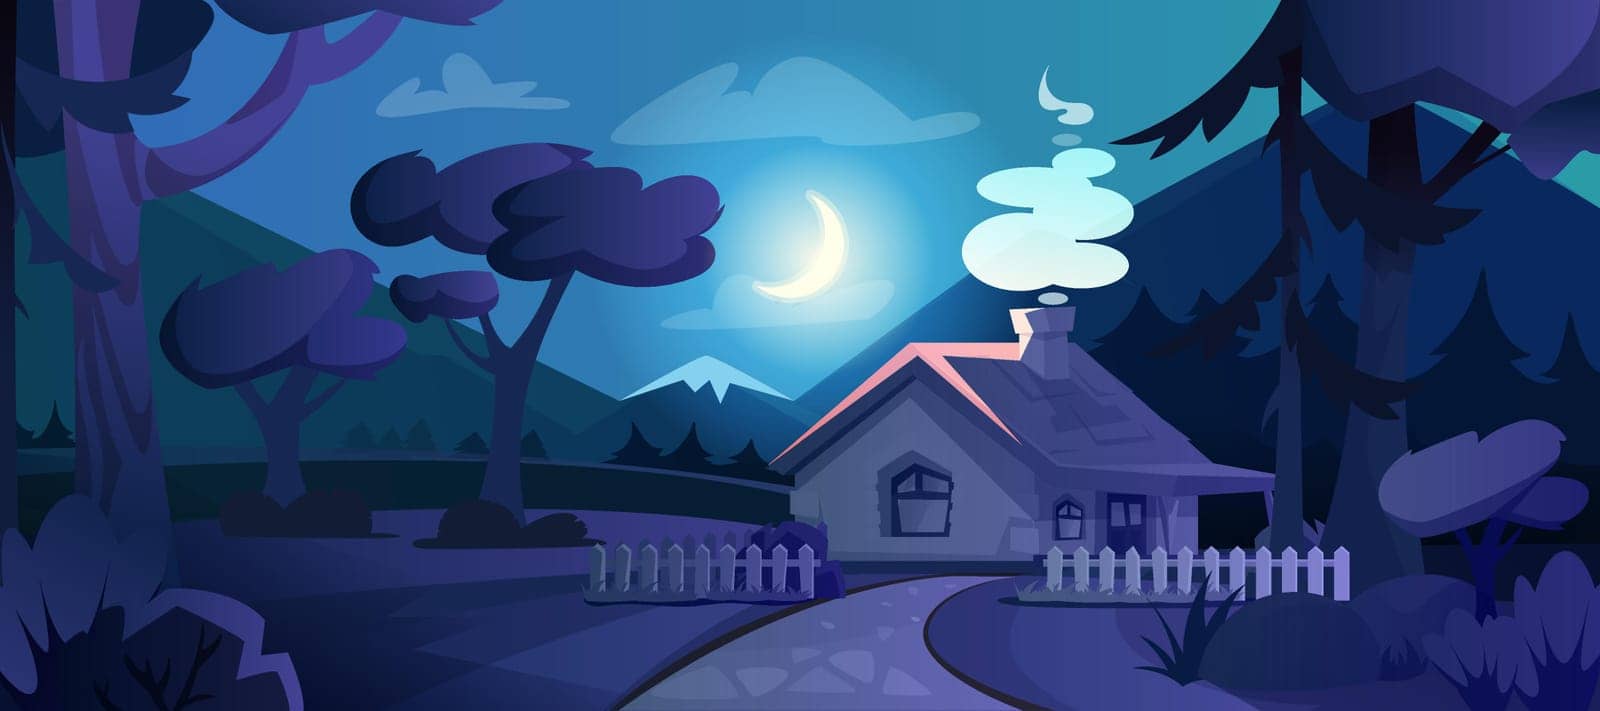 Cartoon country house with glow windows in night forest by Redgreystock